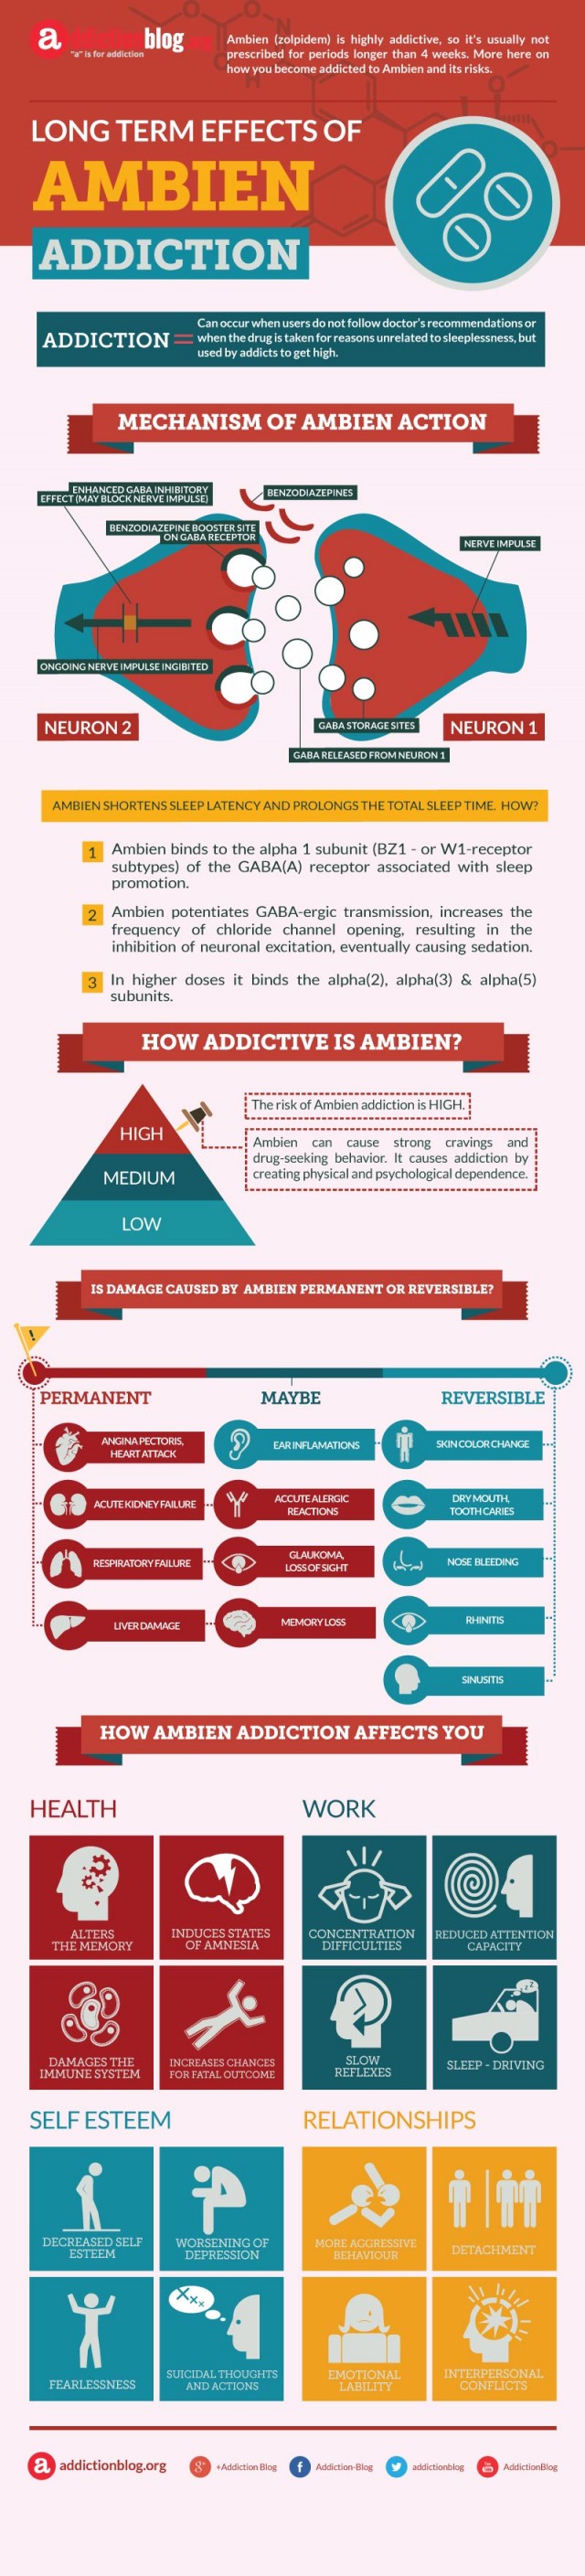 Long term effects of Ambien addiction (INFOGRAPHIC)